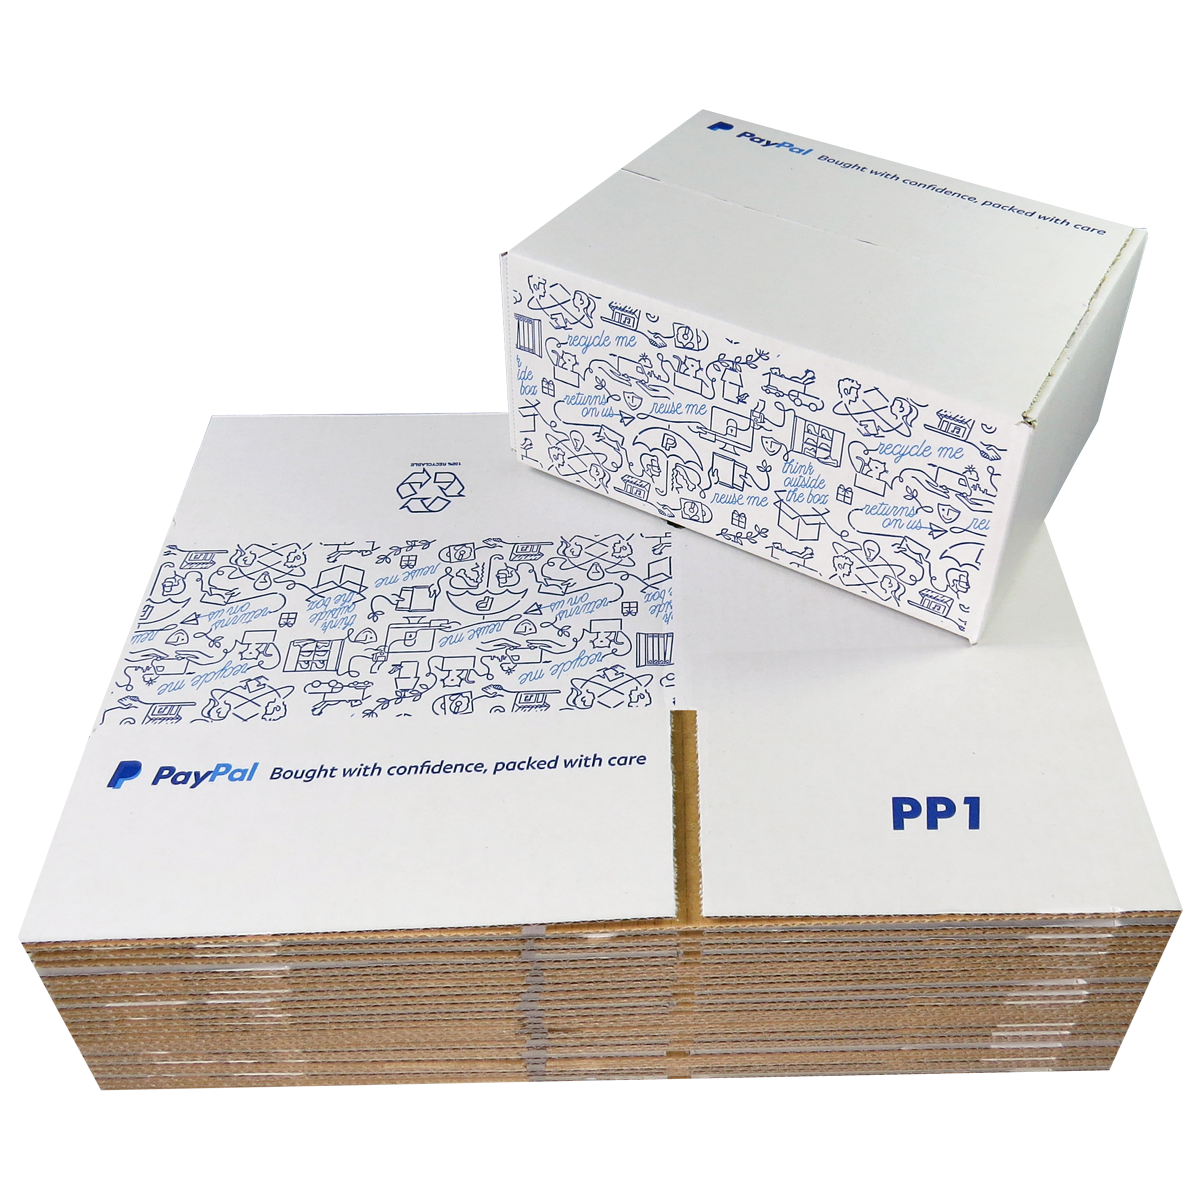 1000 x PP1 PayPal Branded Quality White Single Wall Cardboard Postal Mailing Boxes 200x150x90mm